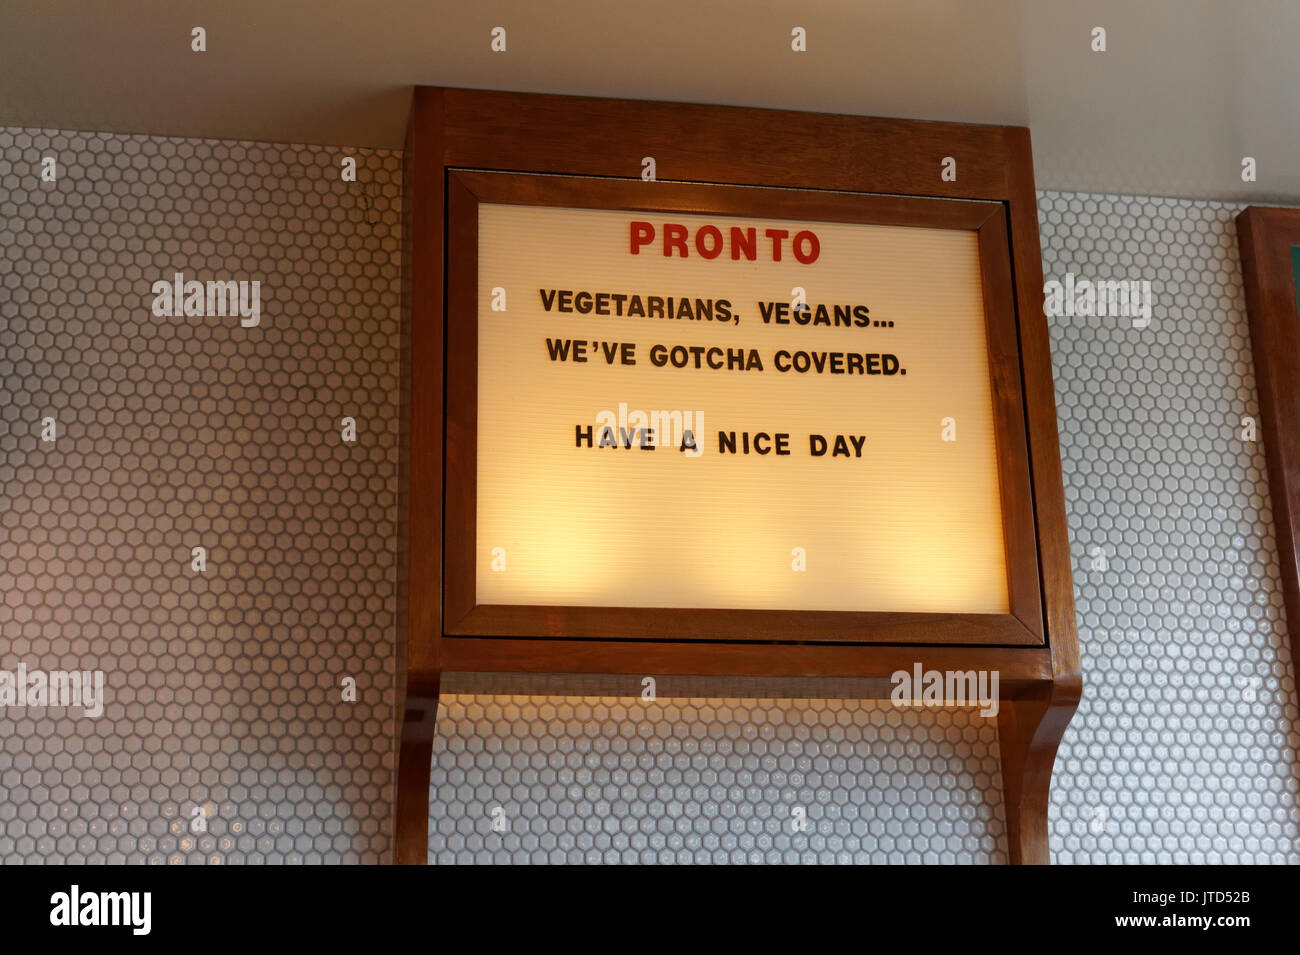 Sign for vegetarians and vegans in Pronto Italian restaurant  in Cambie Village, Vancouver, BC, Canada Stock Photo